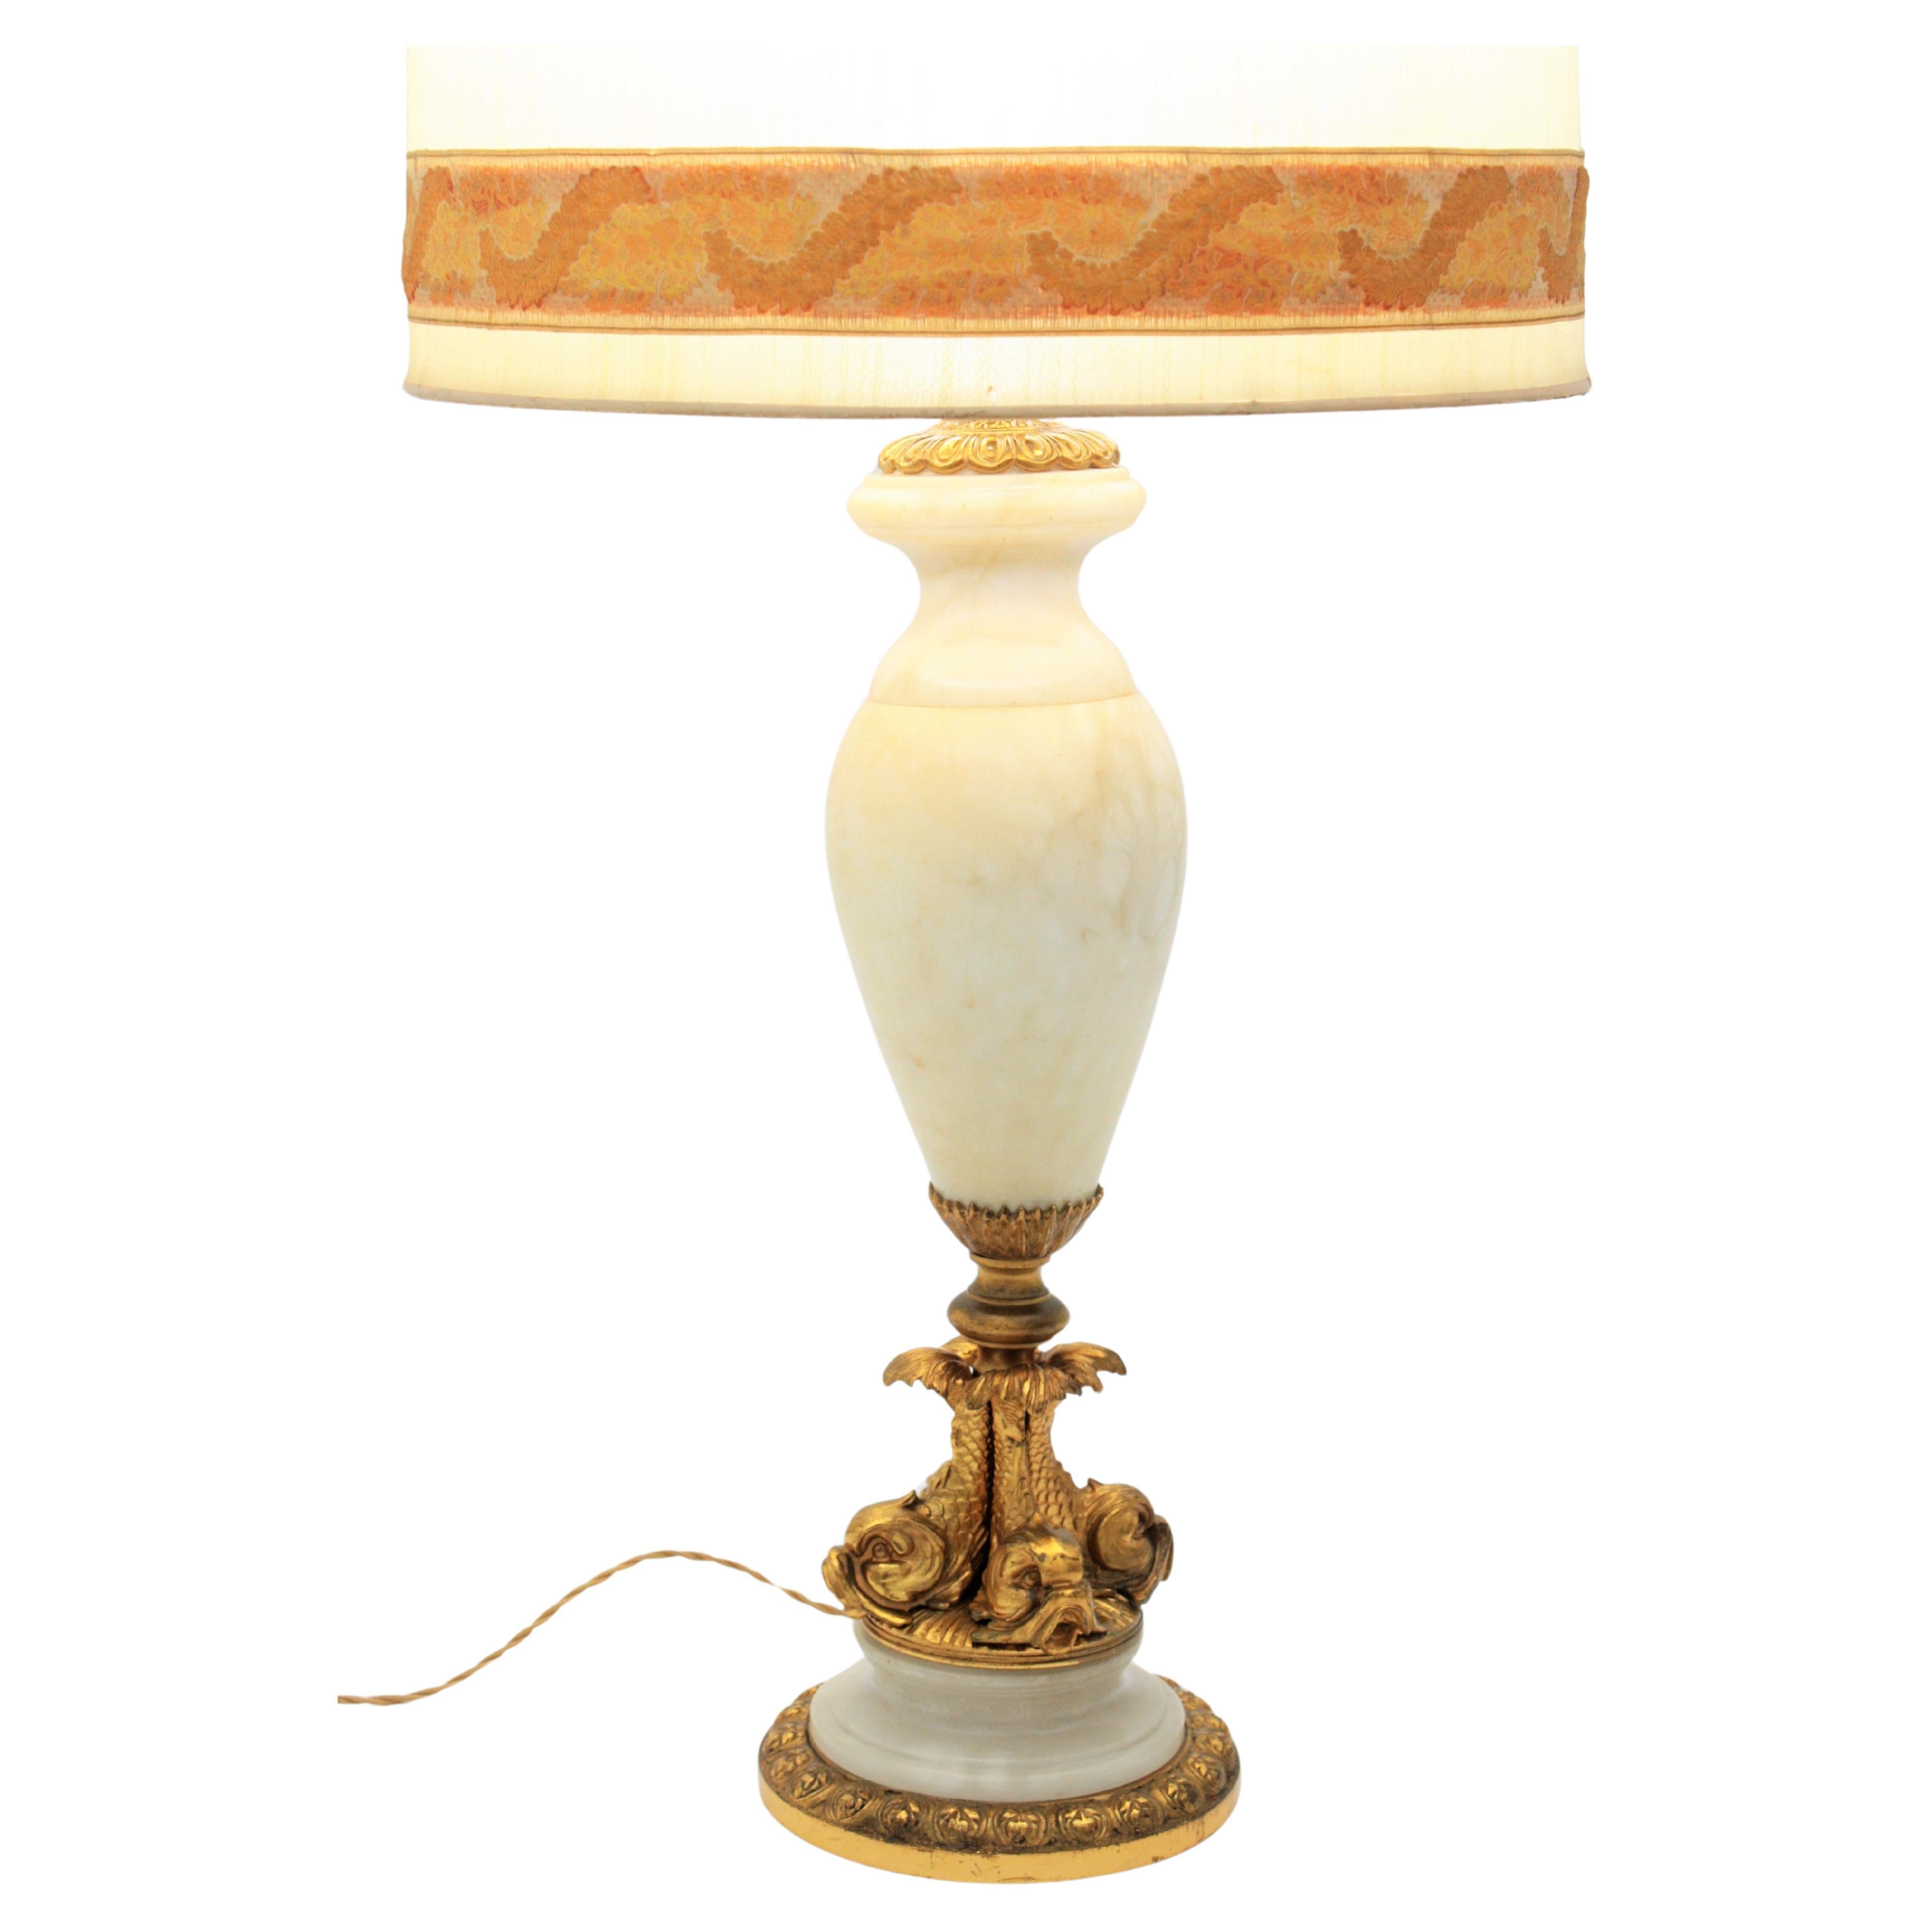 Large Neoclassical Alabaster Lamp with Ormorlu and Bronze Motifs
Sculptural solid gilt bronze koi fish and alabaster neoclassical design large table lamp. Spain 1950s.
This unique table lamp manufactured at the Mid-Century Modern period features